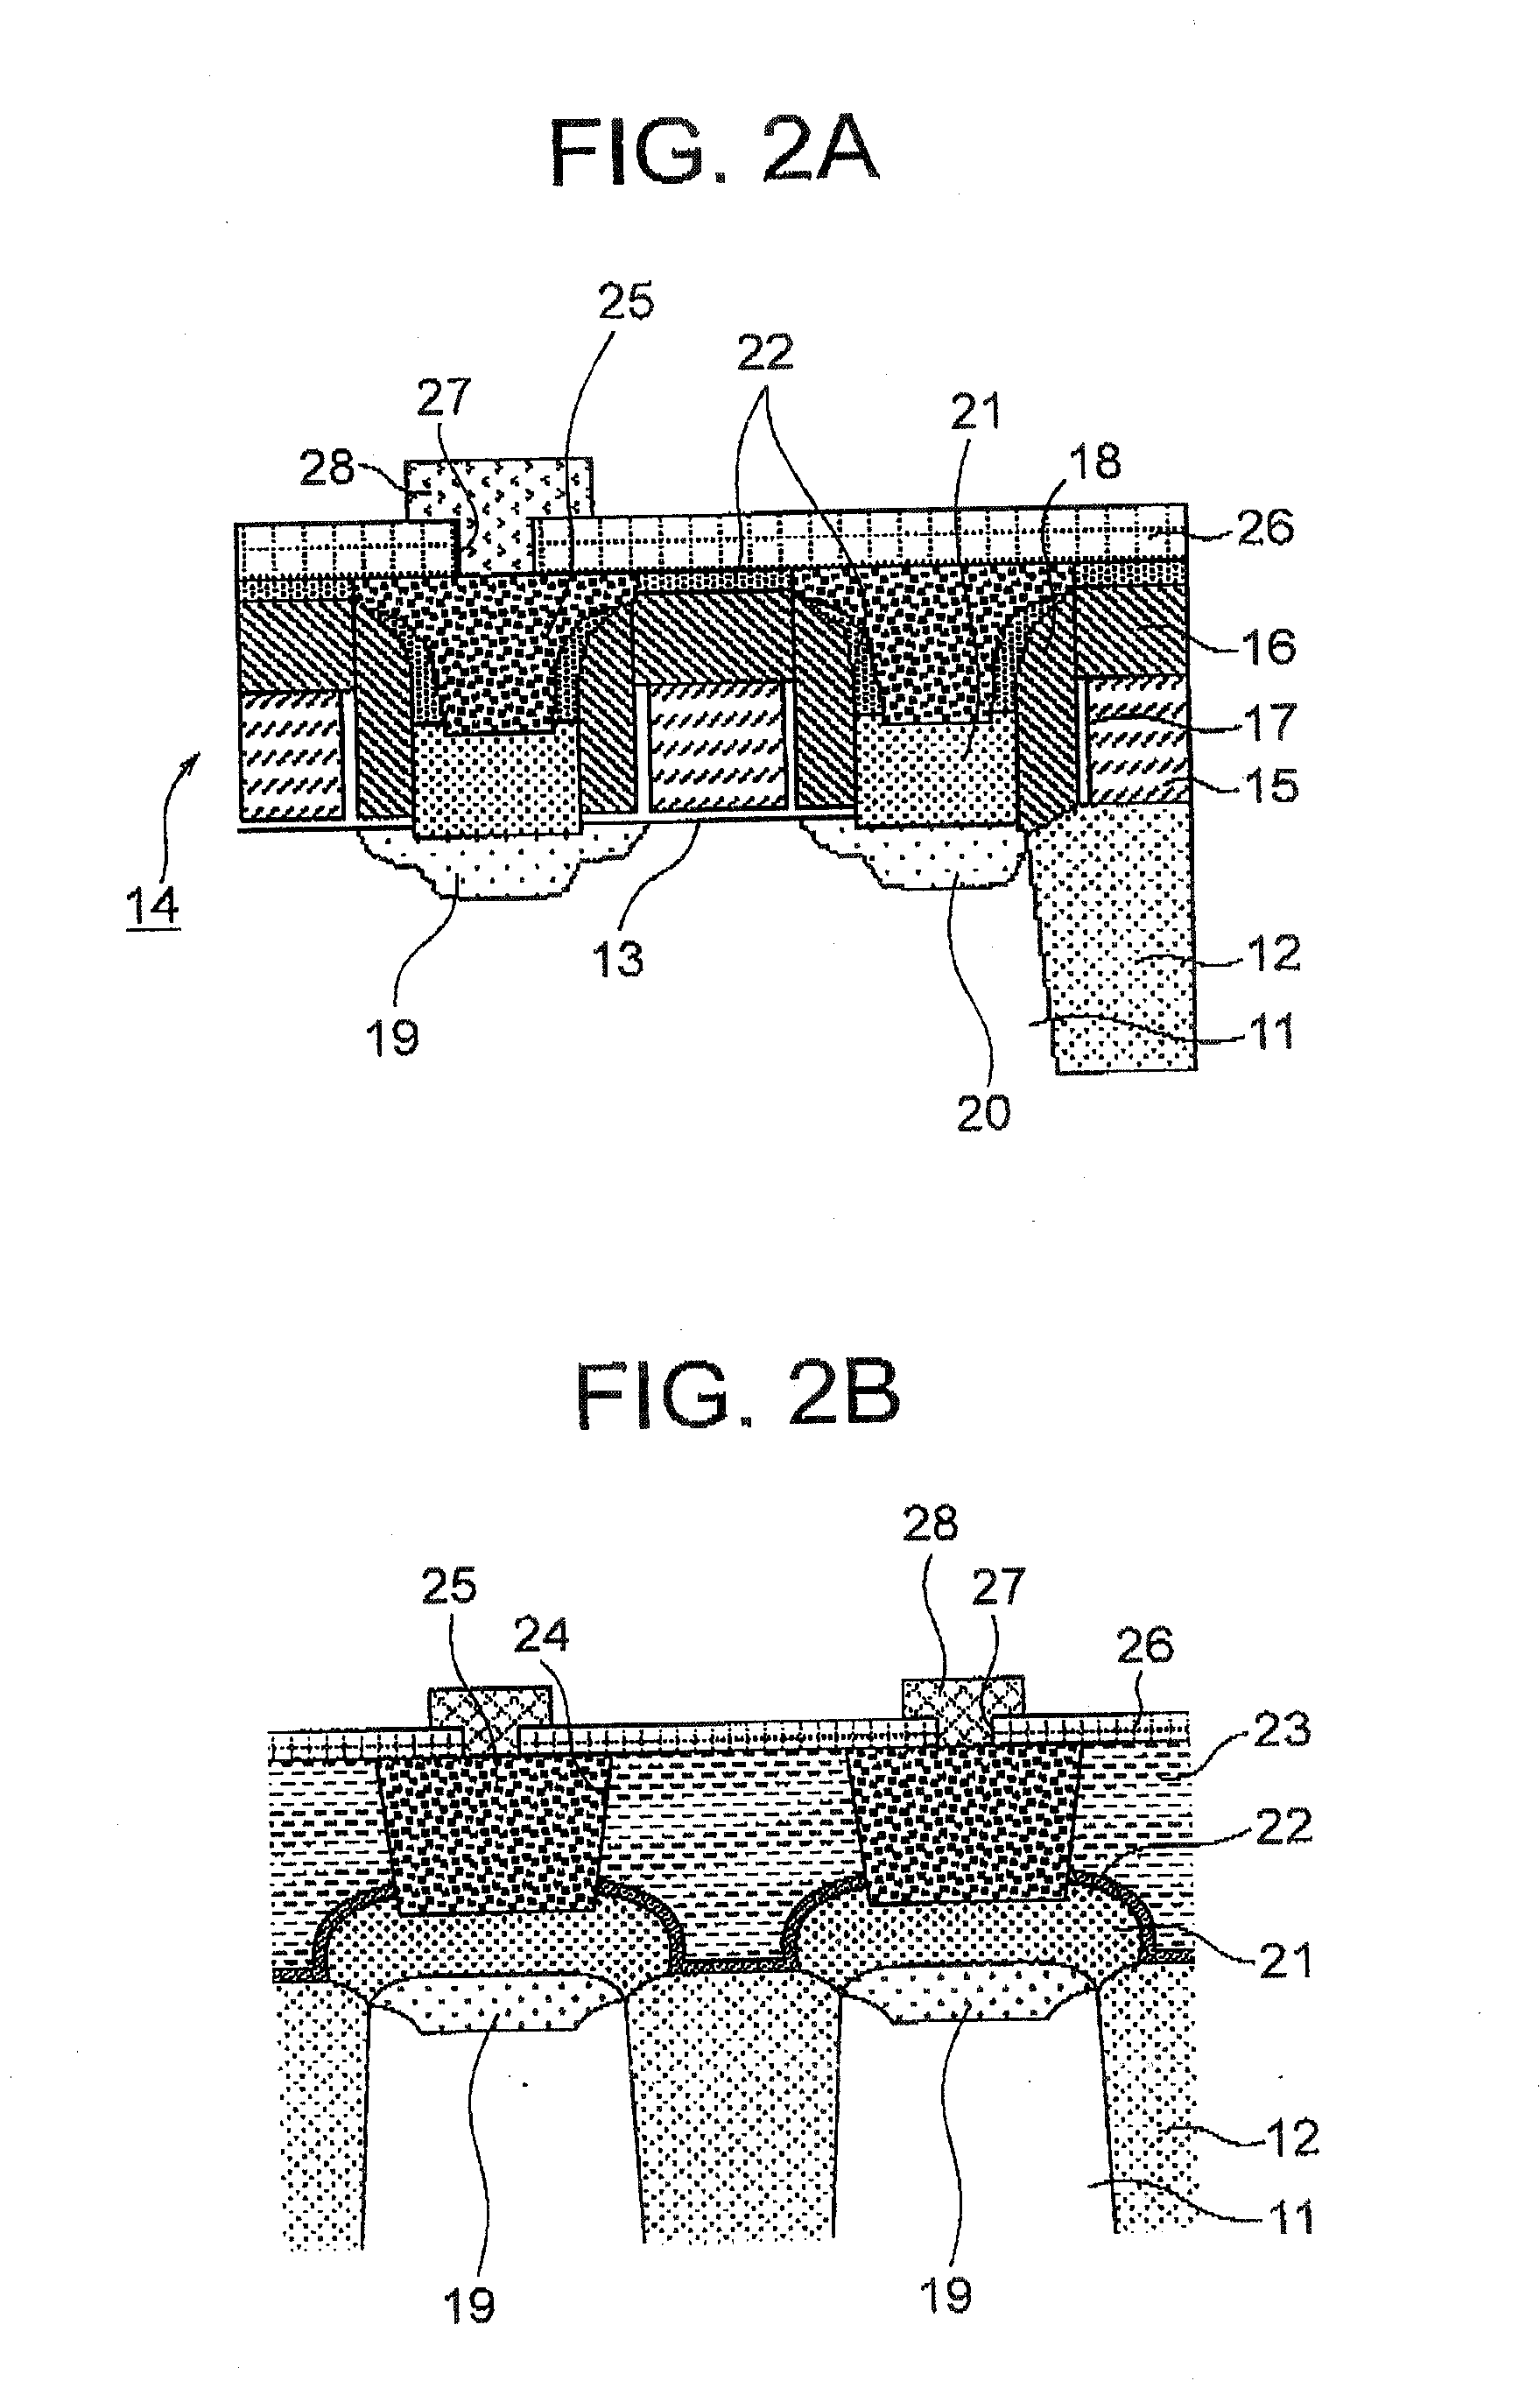 Semiconductor device having an epitaxial-grown contact plug